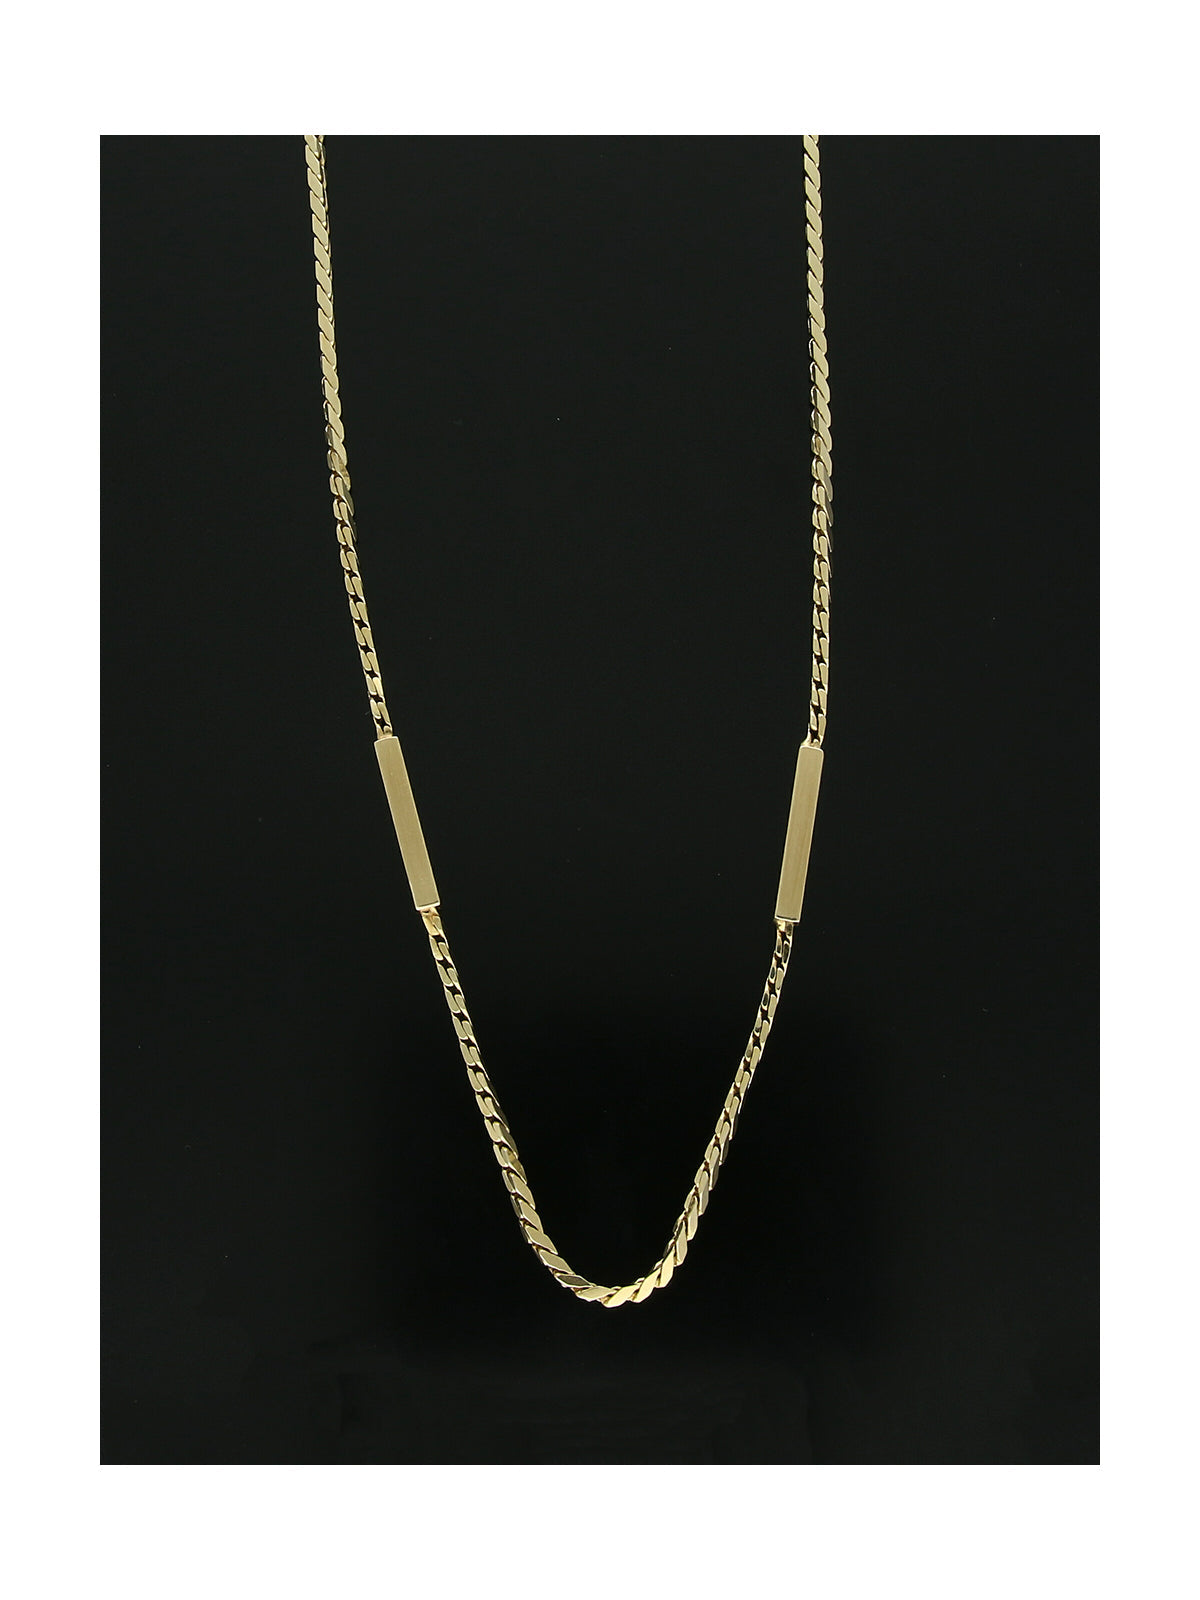 Pre Owned Flat Chain with Bar Links in 9ct Yellow Gold